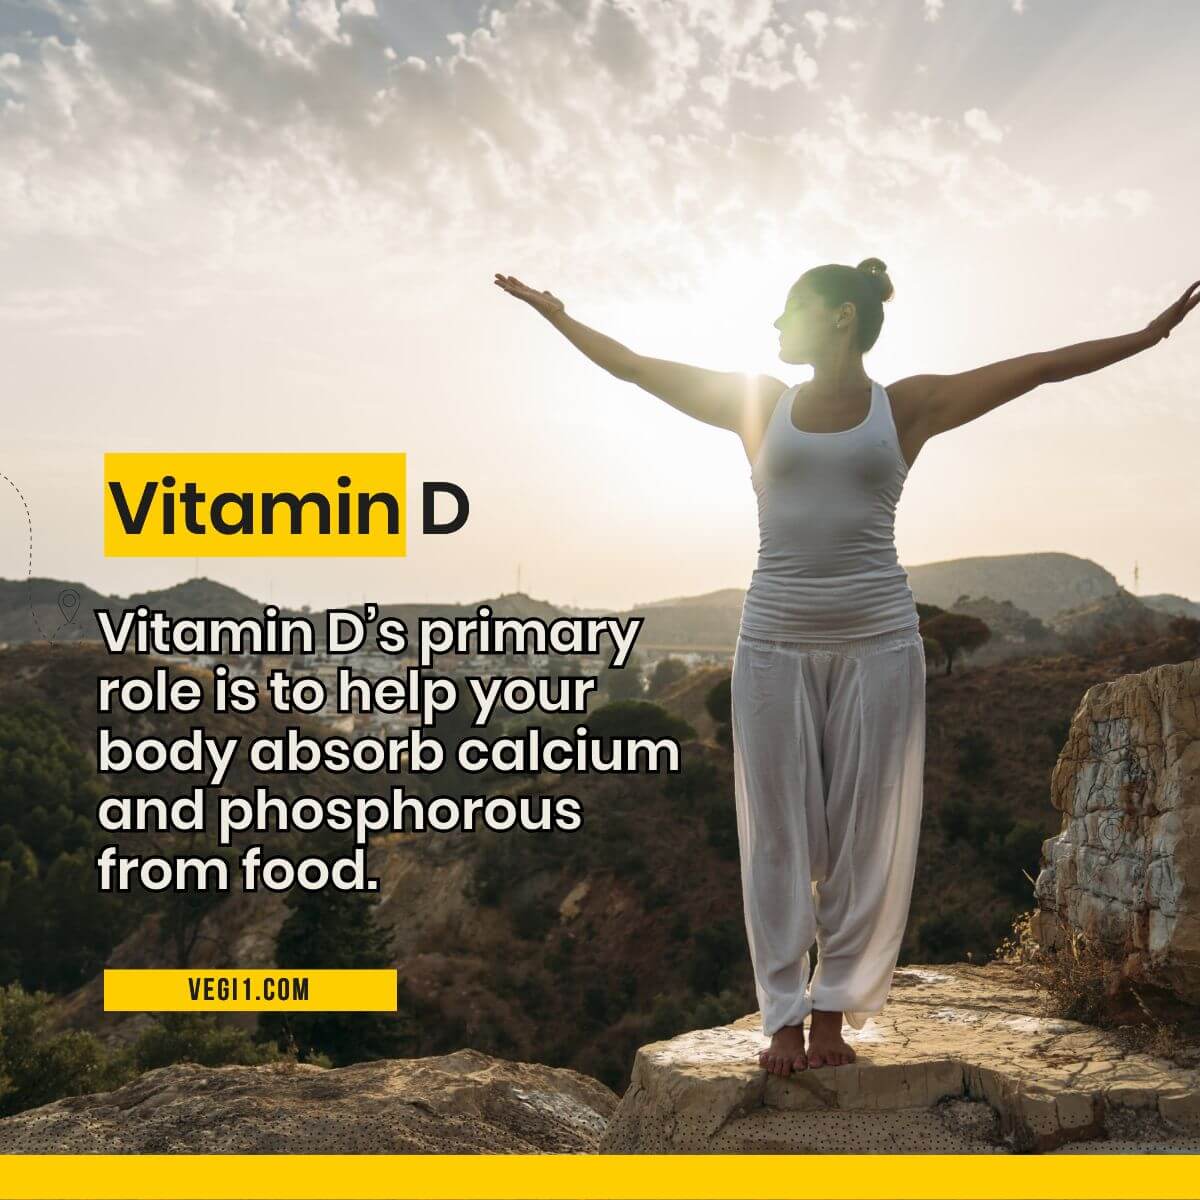 Why do you need vitamin D